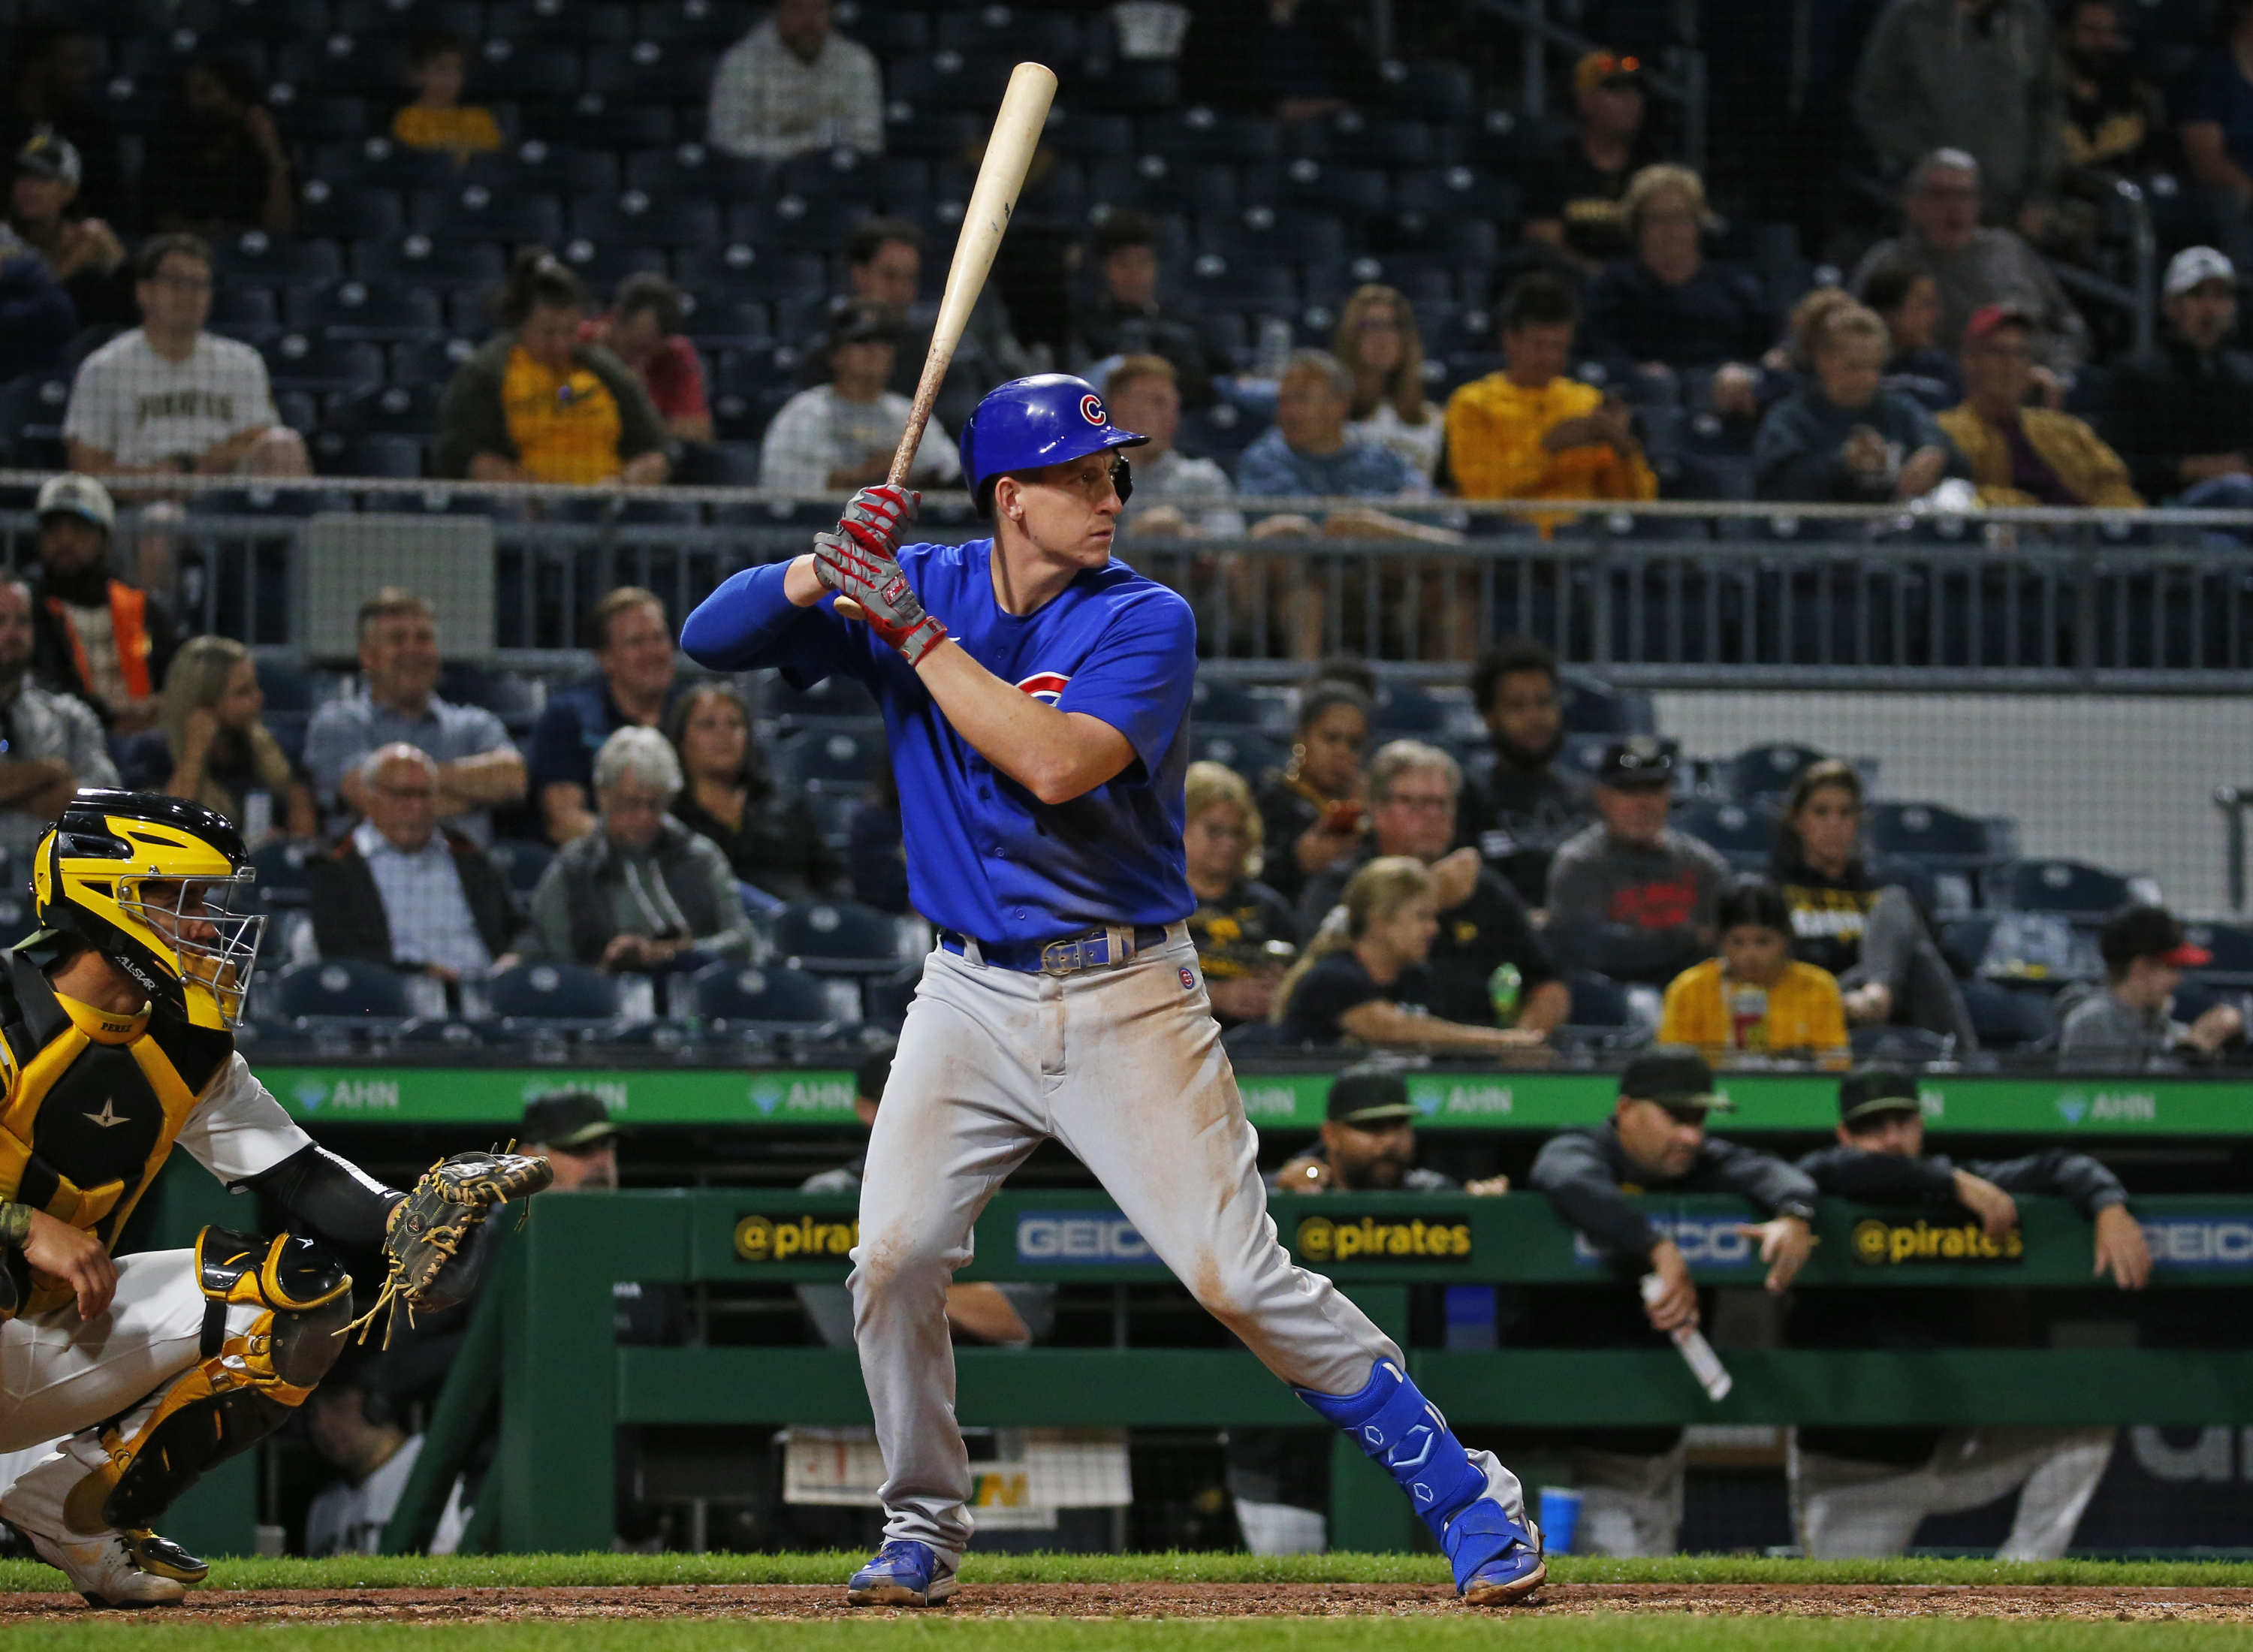 Frank Schwindel #18 of the Chicago Cubs in action against the Pittsburgh Pirates during the game at PNC Park on September 29, 2021 in Pittsburgh, Pennsylvania.